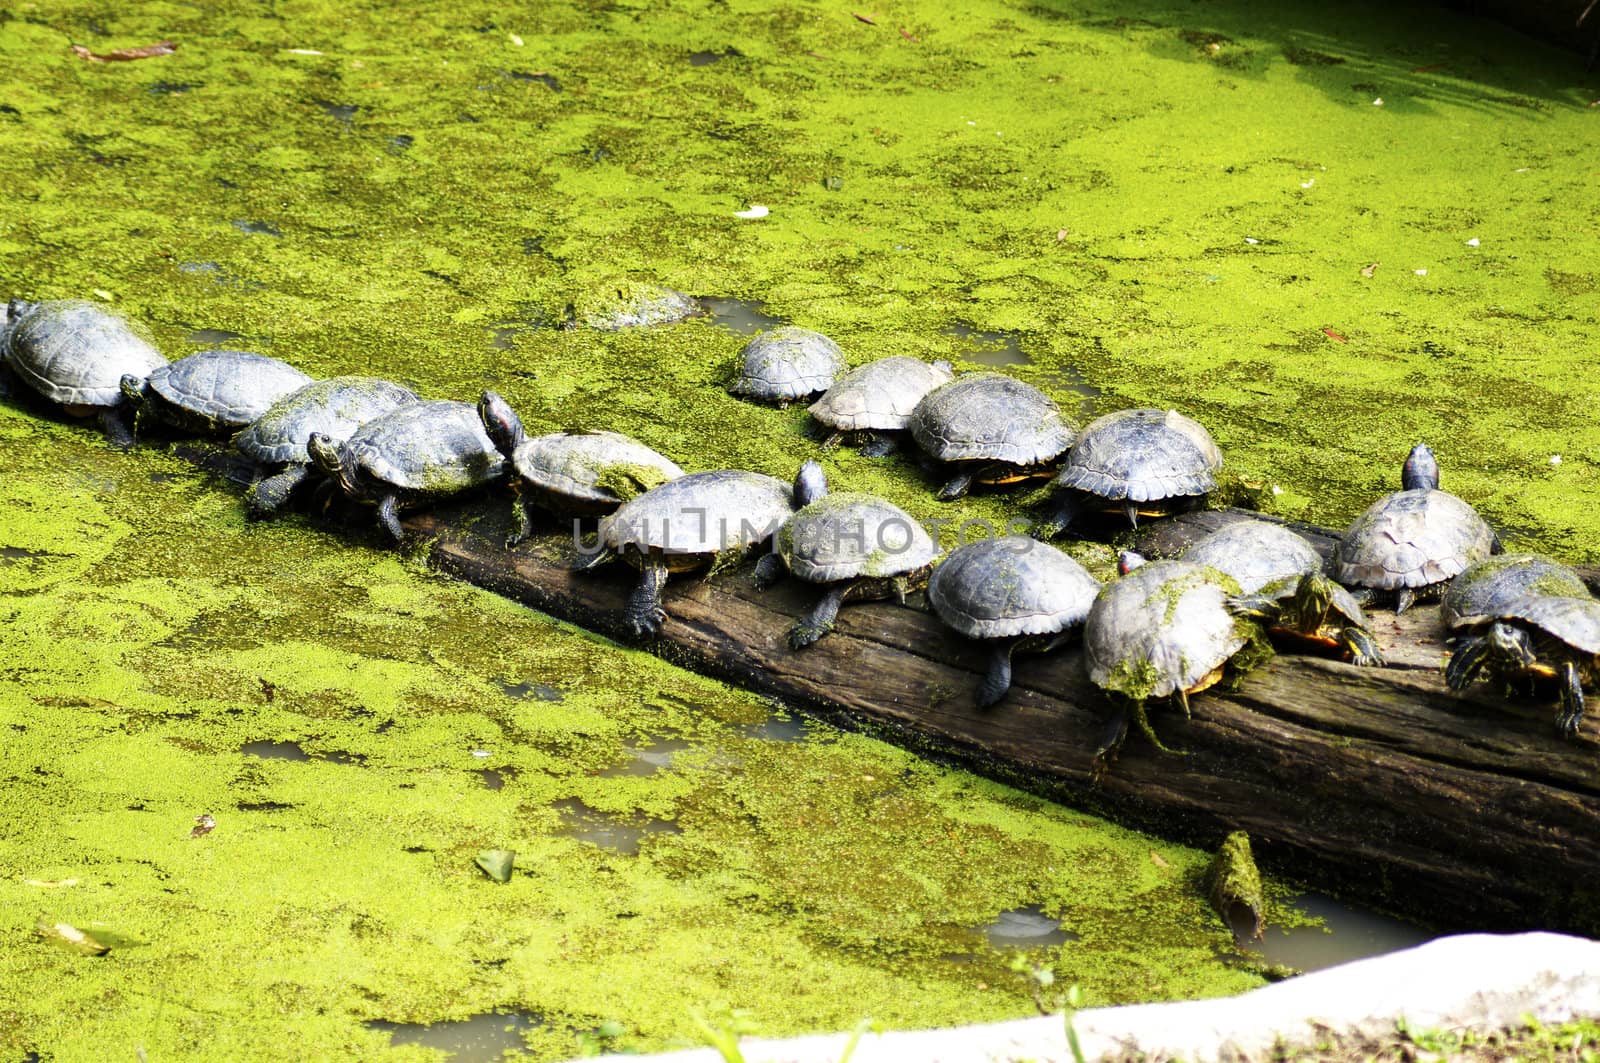 Various types of turtles sunning on a log of wood in its artificial lake